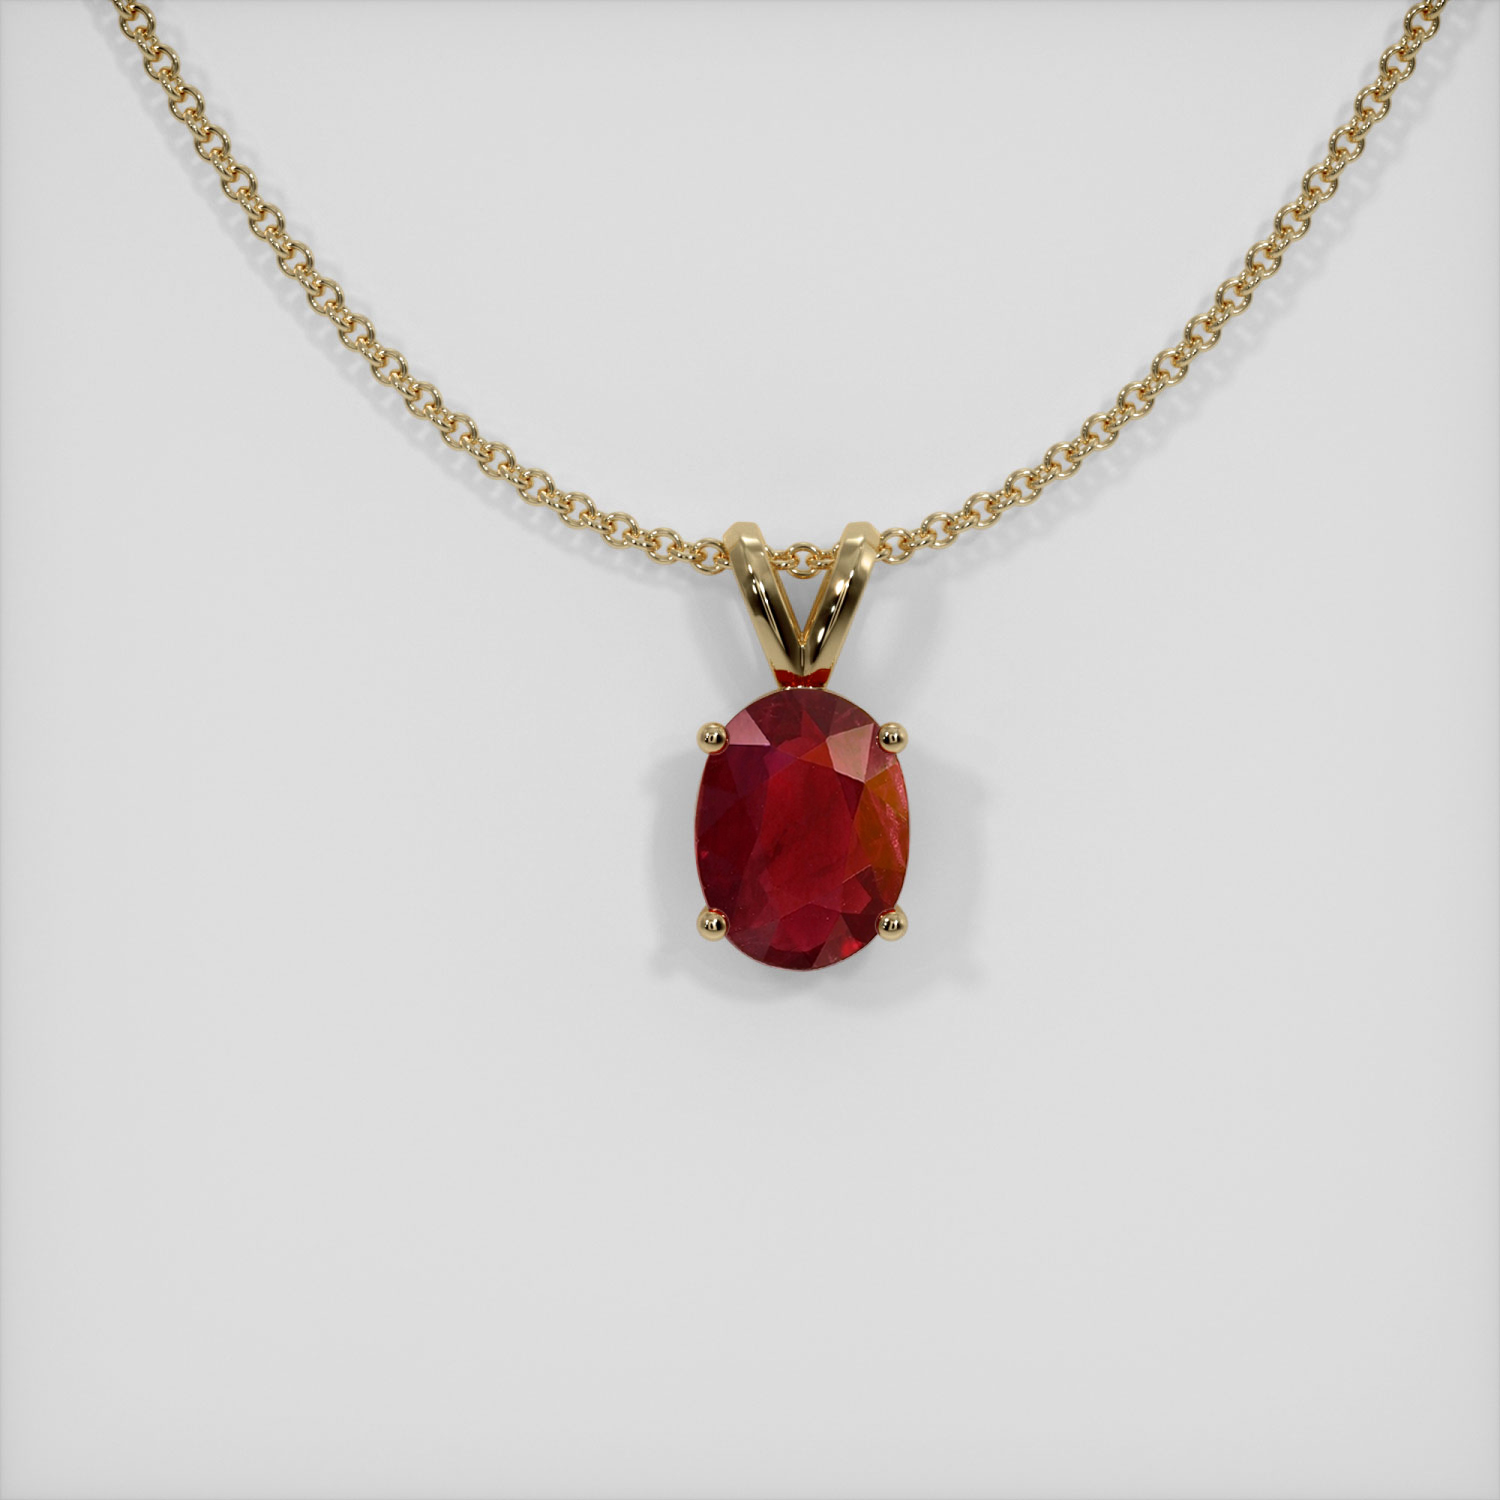 Carved Ruby teardrop pendant - The Lizzadro Museum of Lapidary Art